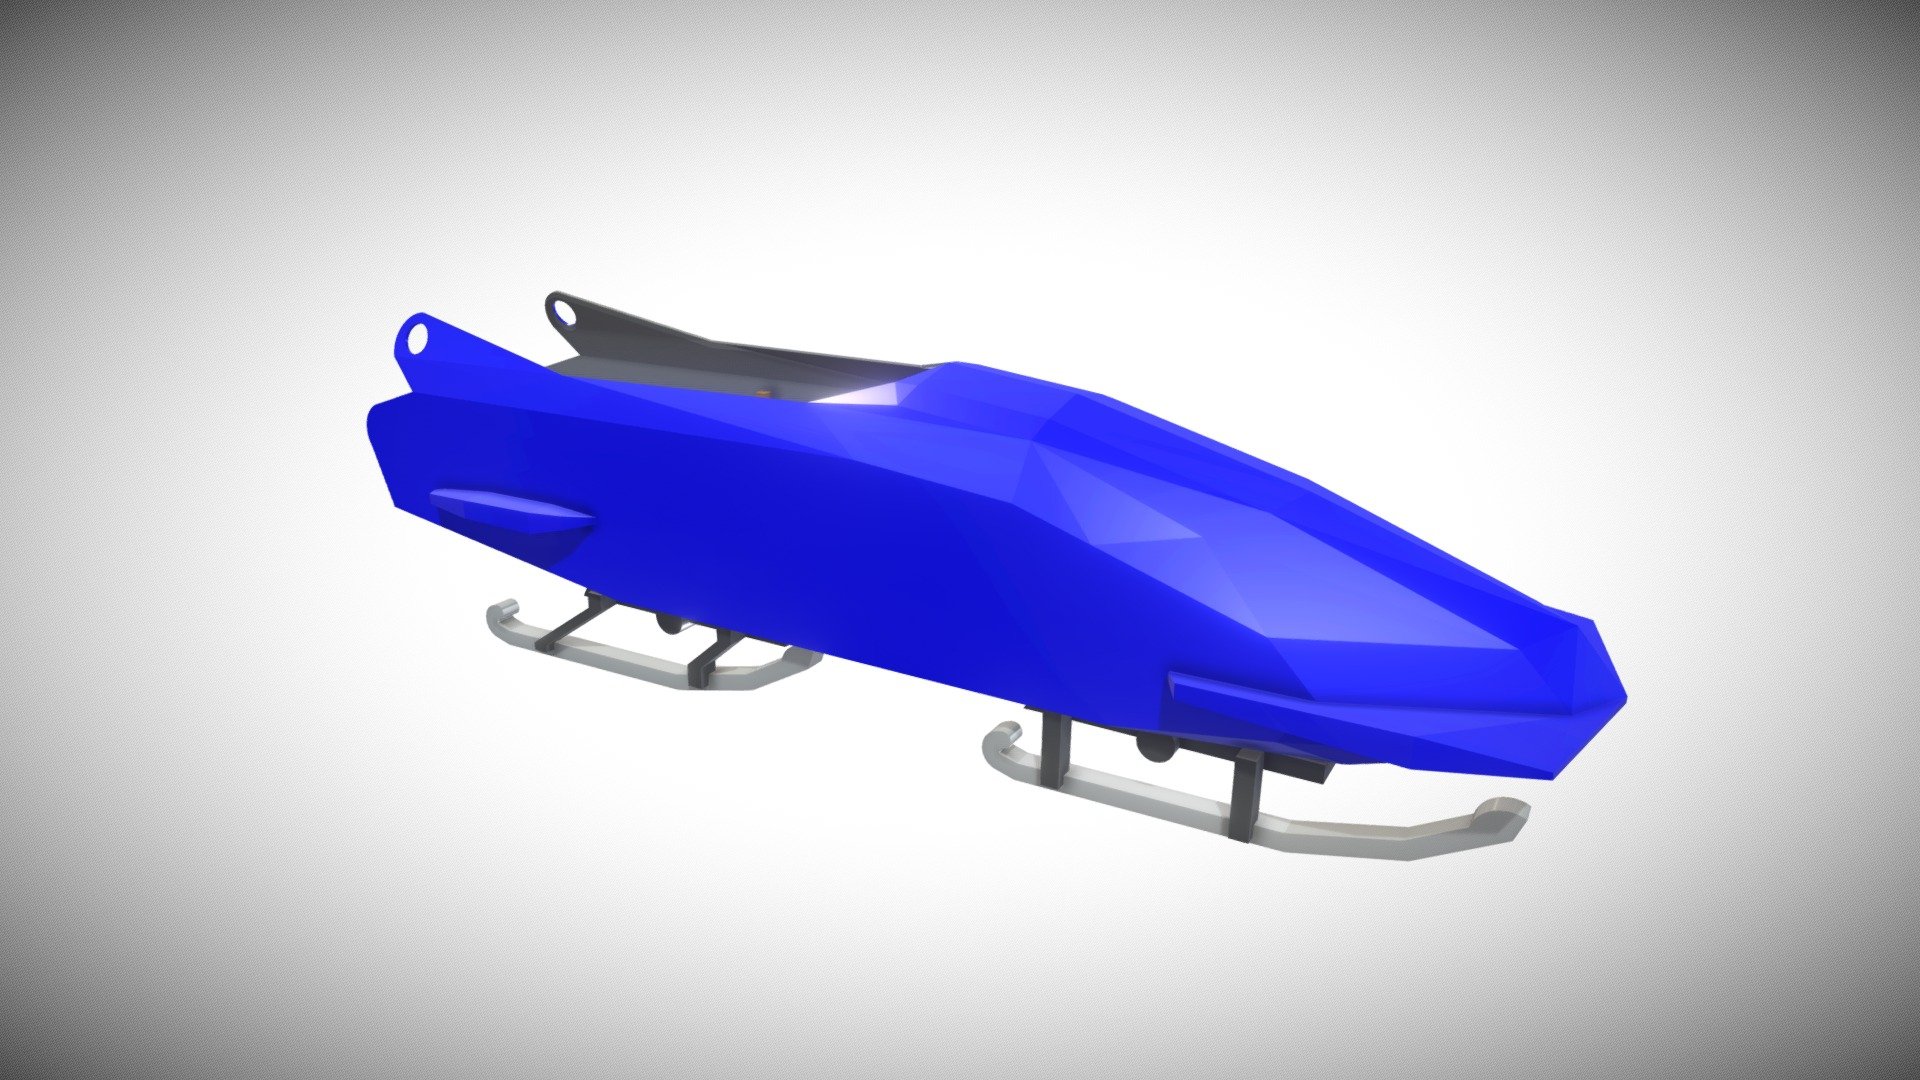 Racing Bobsleigh, Low Poly Model made in the challenge (30 minute model) using Sketchup 2021.

Model made without the use of image planes, only visual reference - Racing Bobsleigh - Low Poly (30 minute model) - 3D model by Total Craft (@total_craft) 3d model